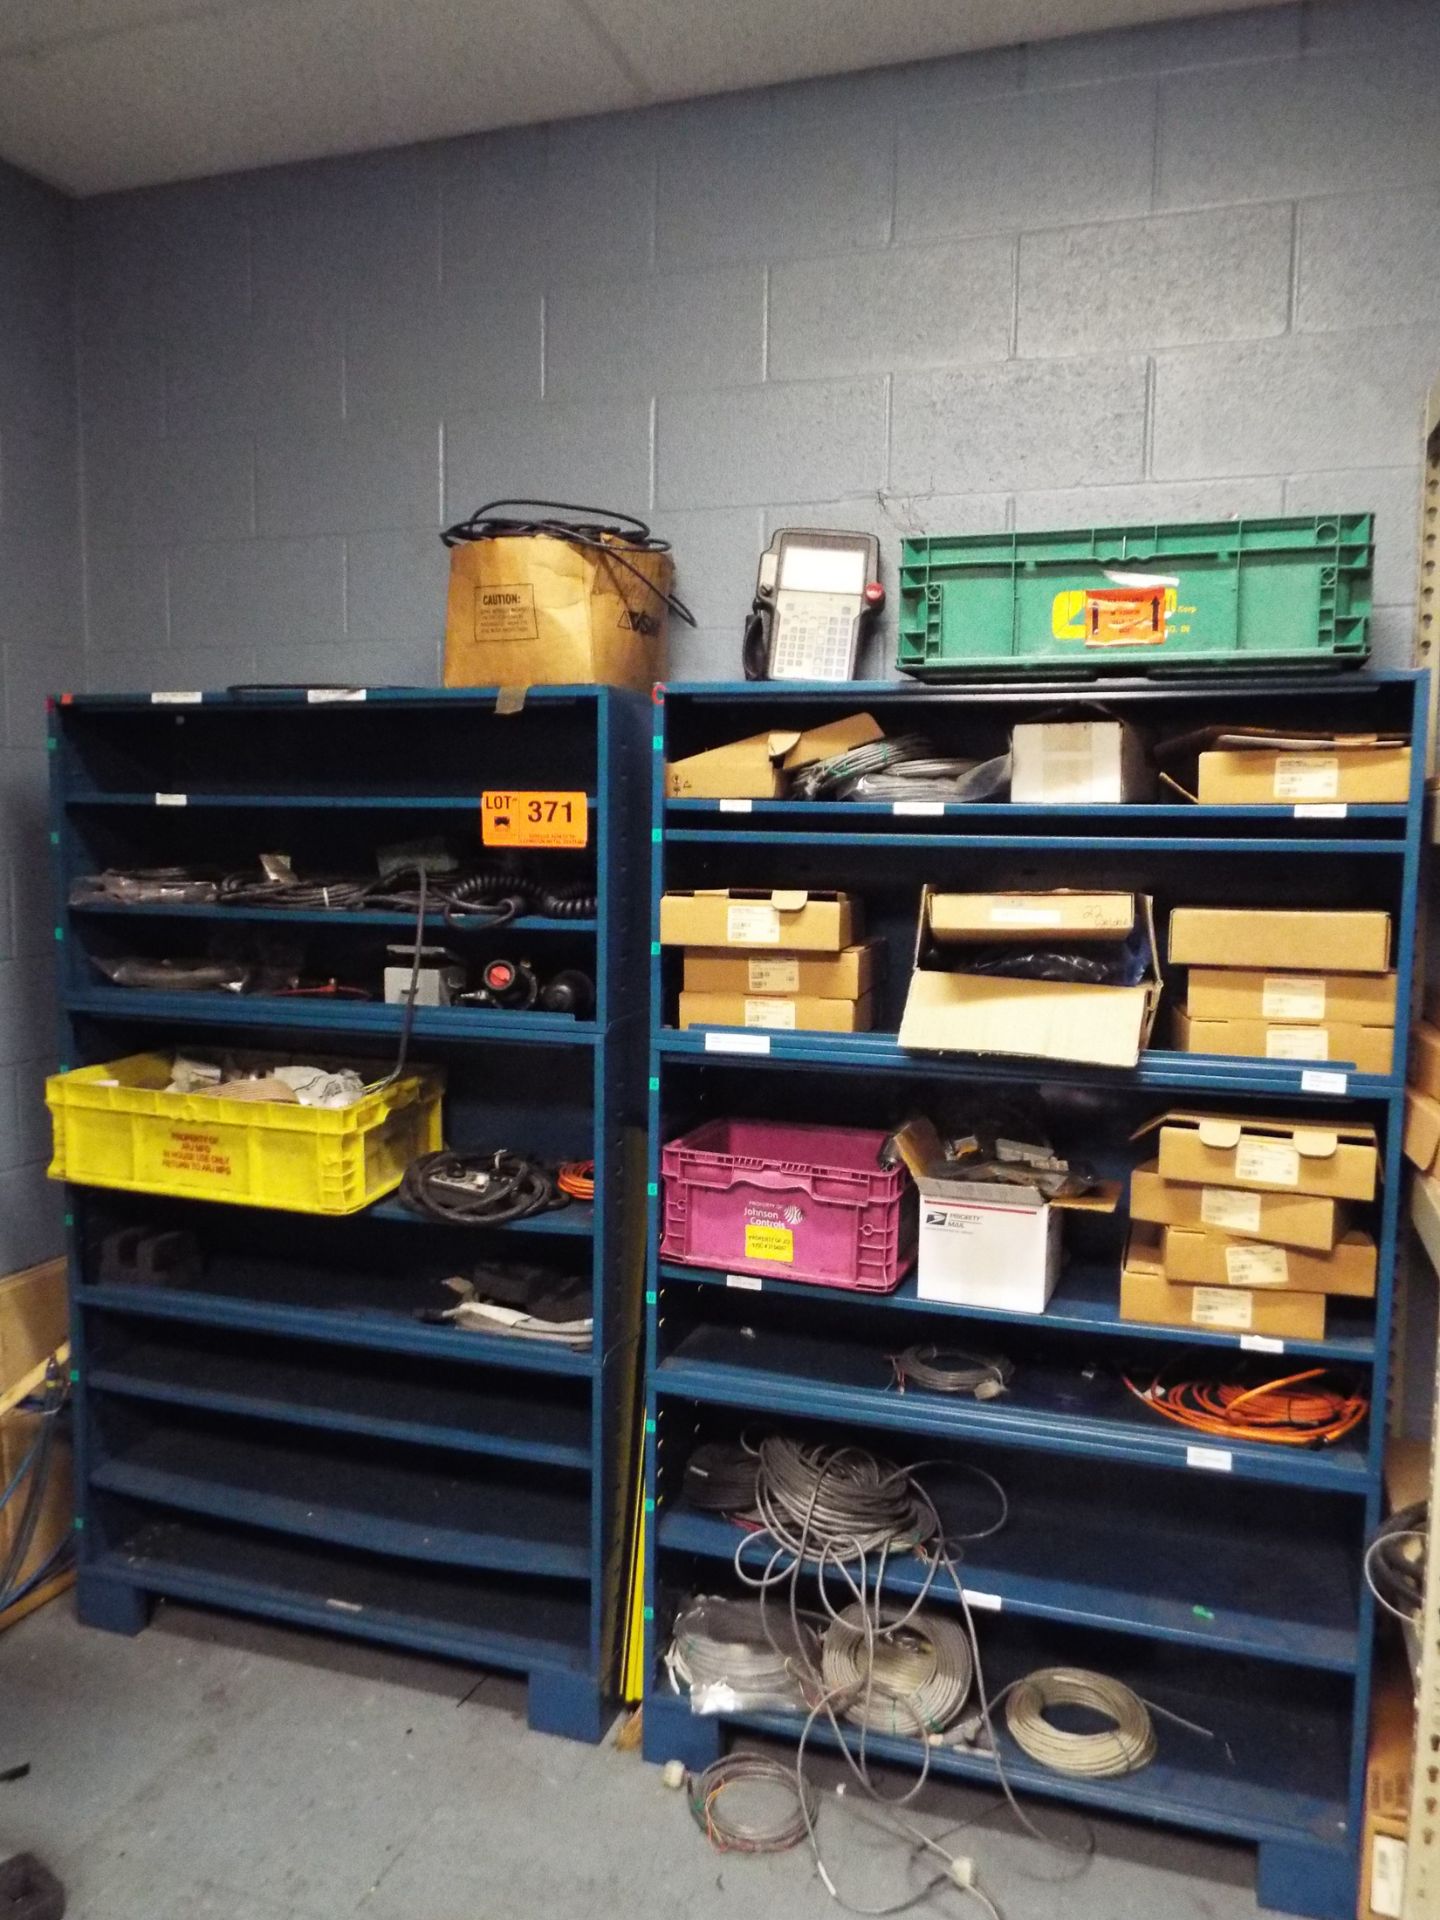 LOT/ SHELVES WITH CONTENTS - WIRE, ROBOT COMPONENTS, SPARE PARTS